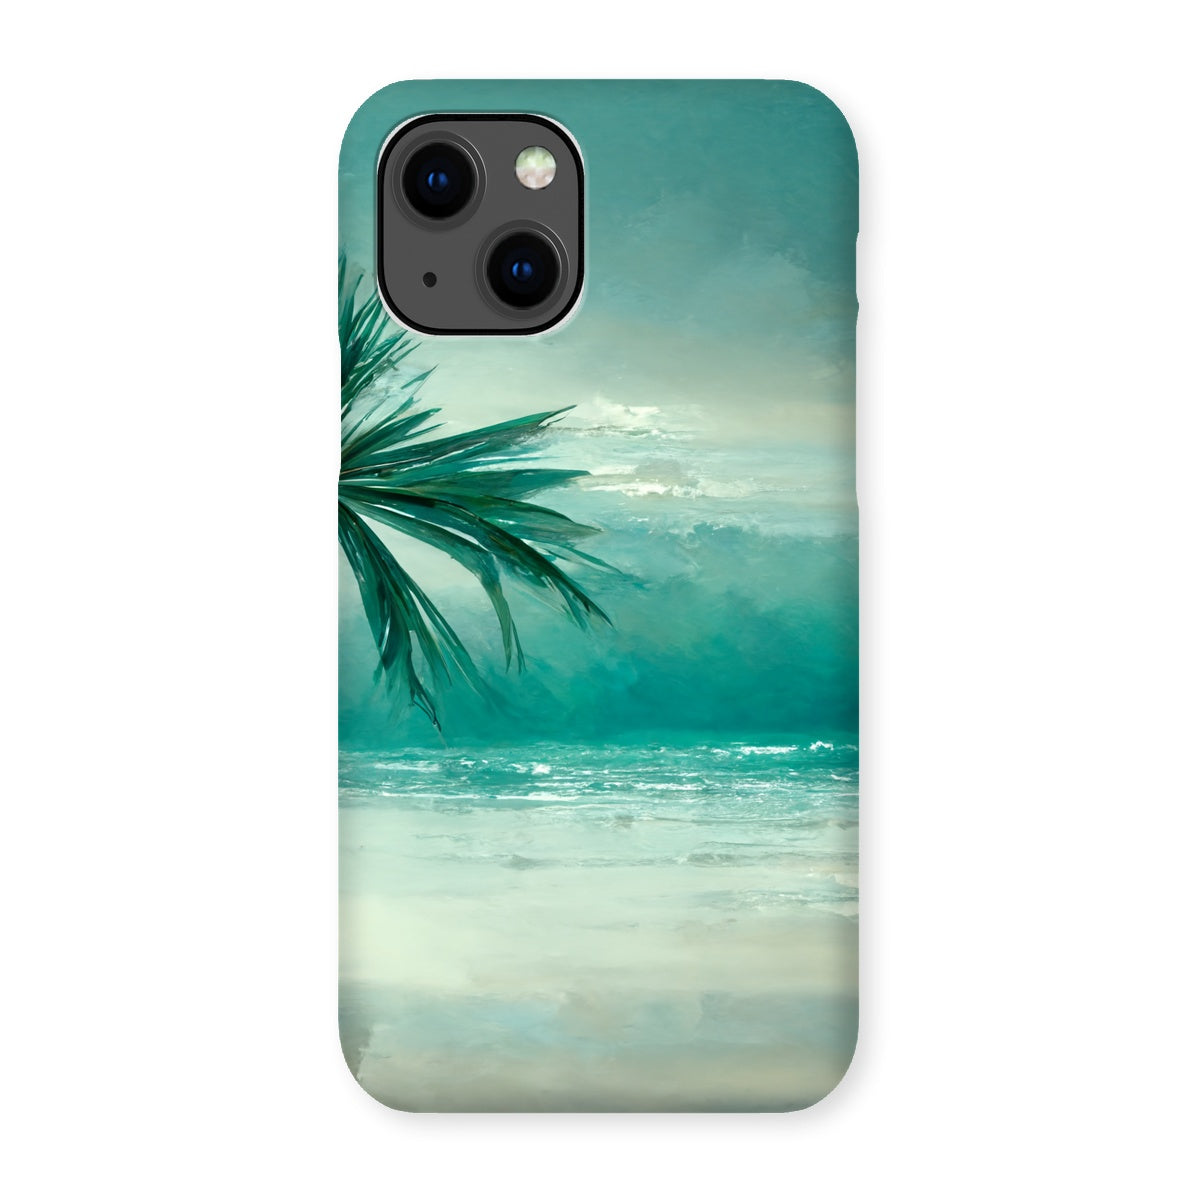 Lonesome Palm Snap Phone Case